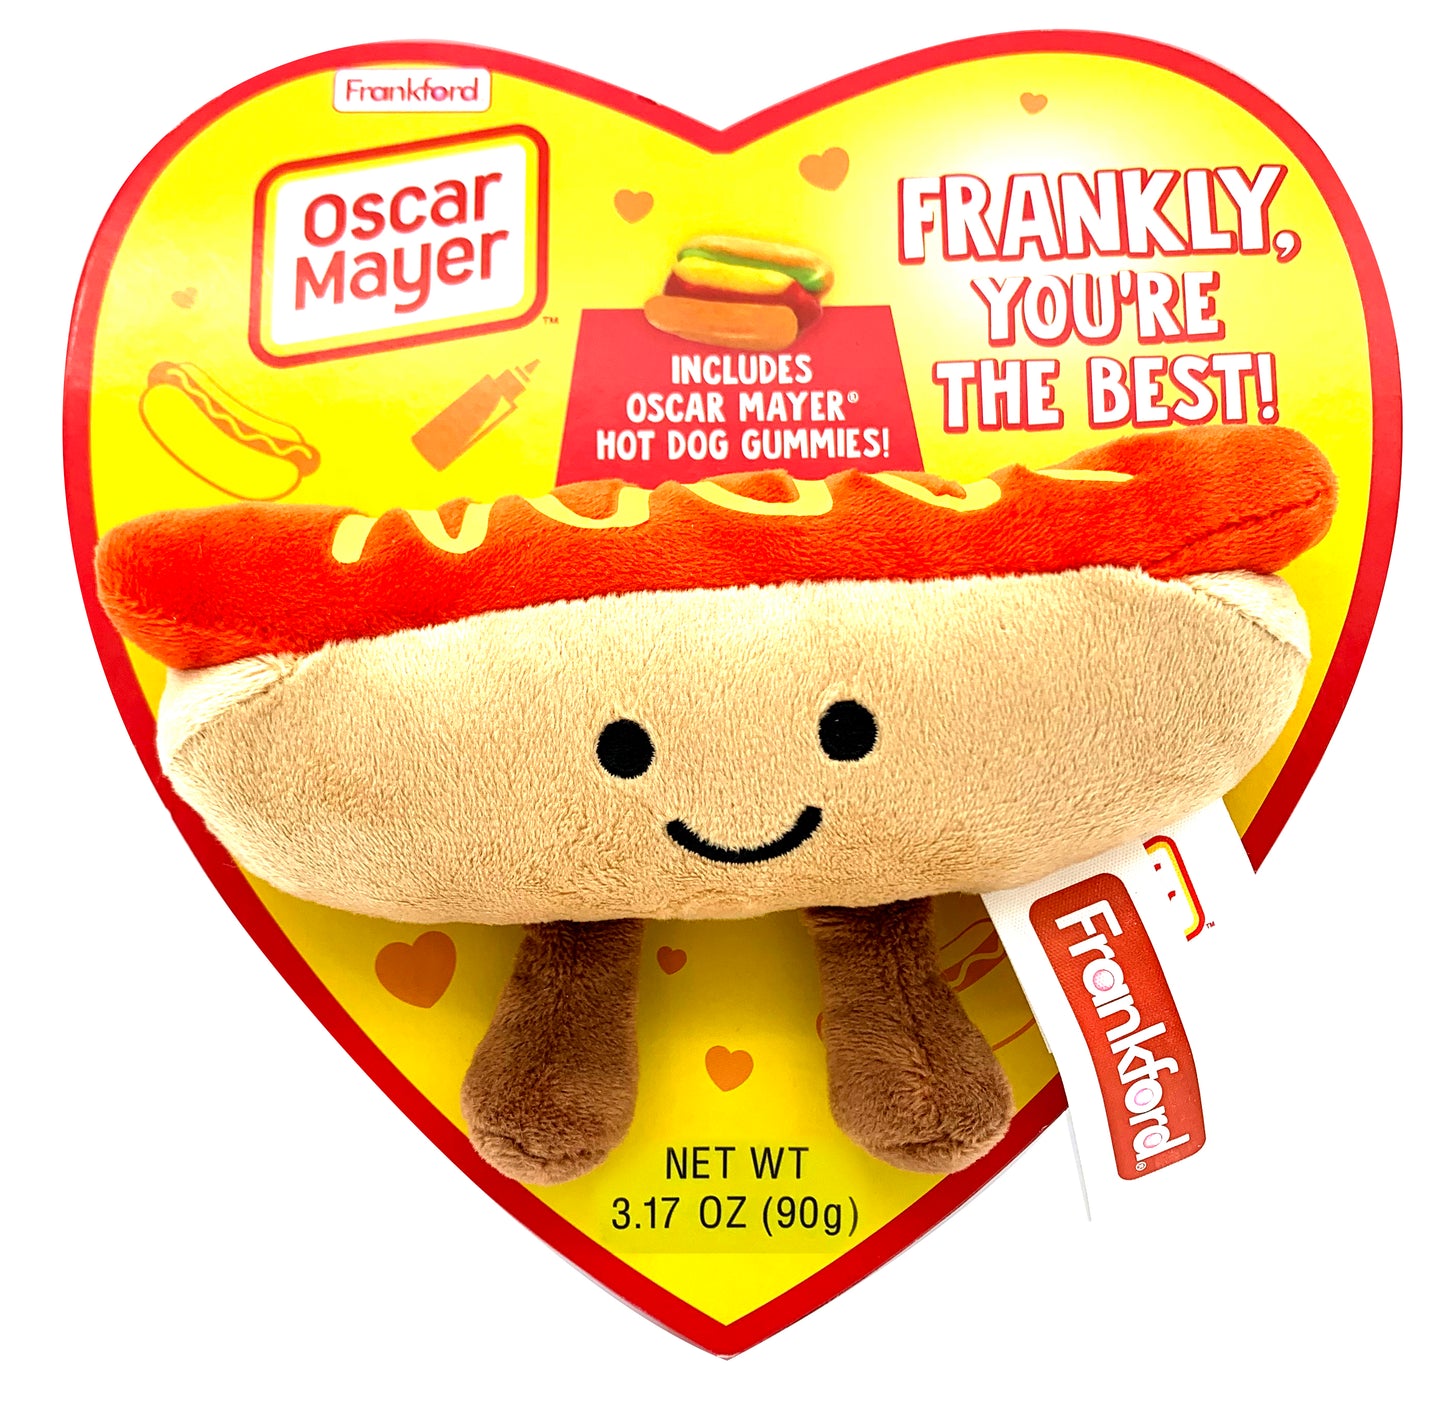 yellow heart shaped box with red border and a hot dog plush on the front